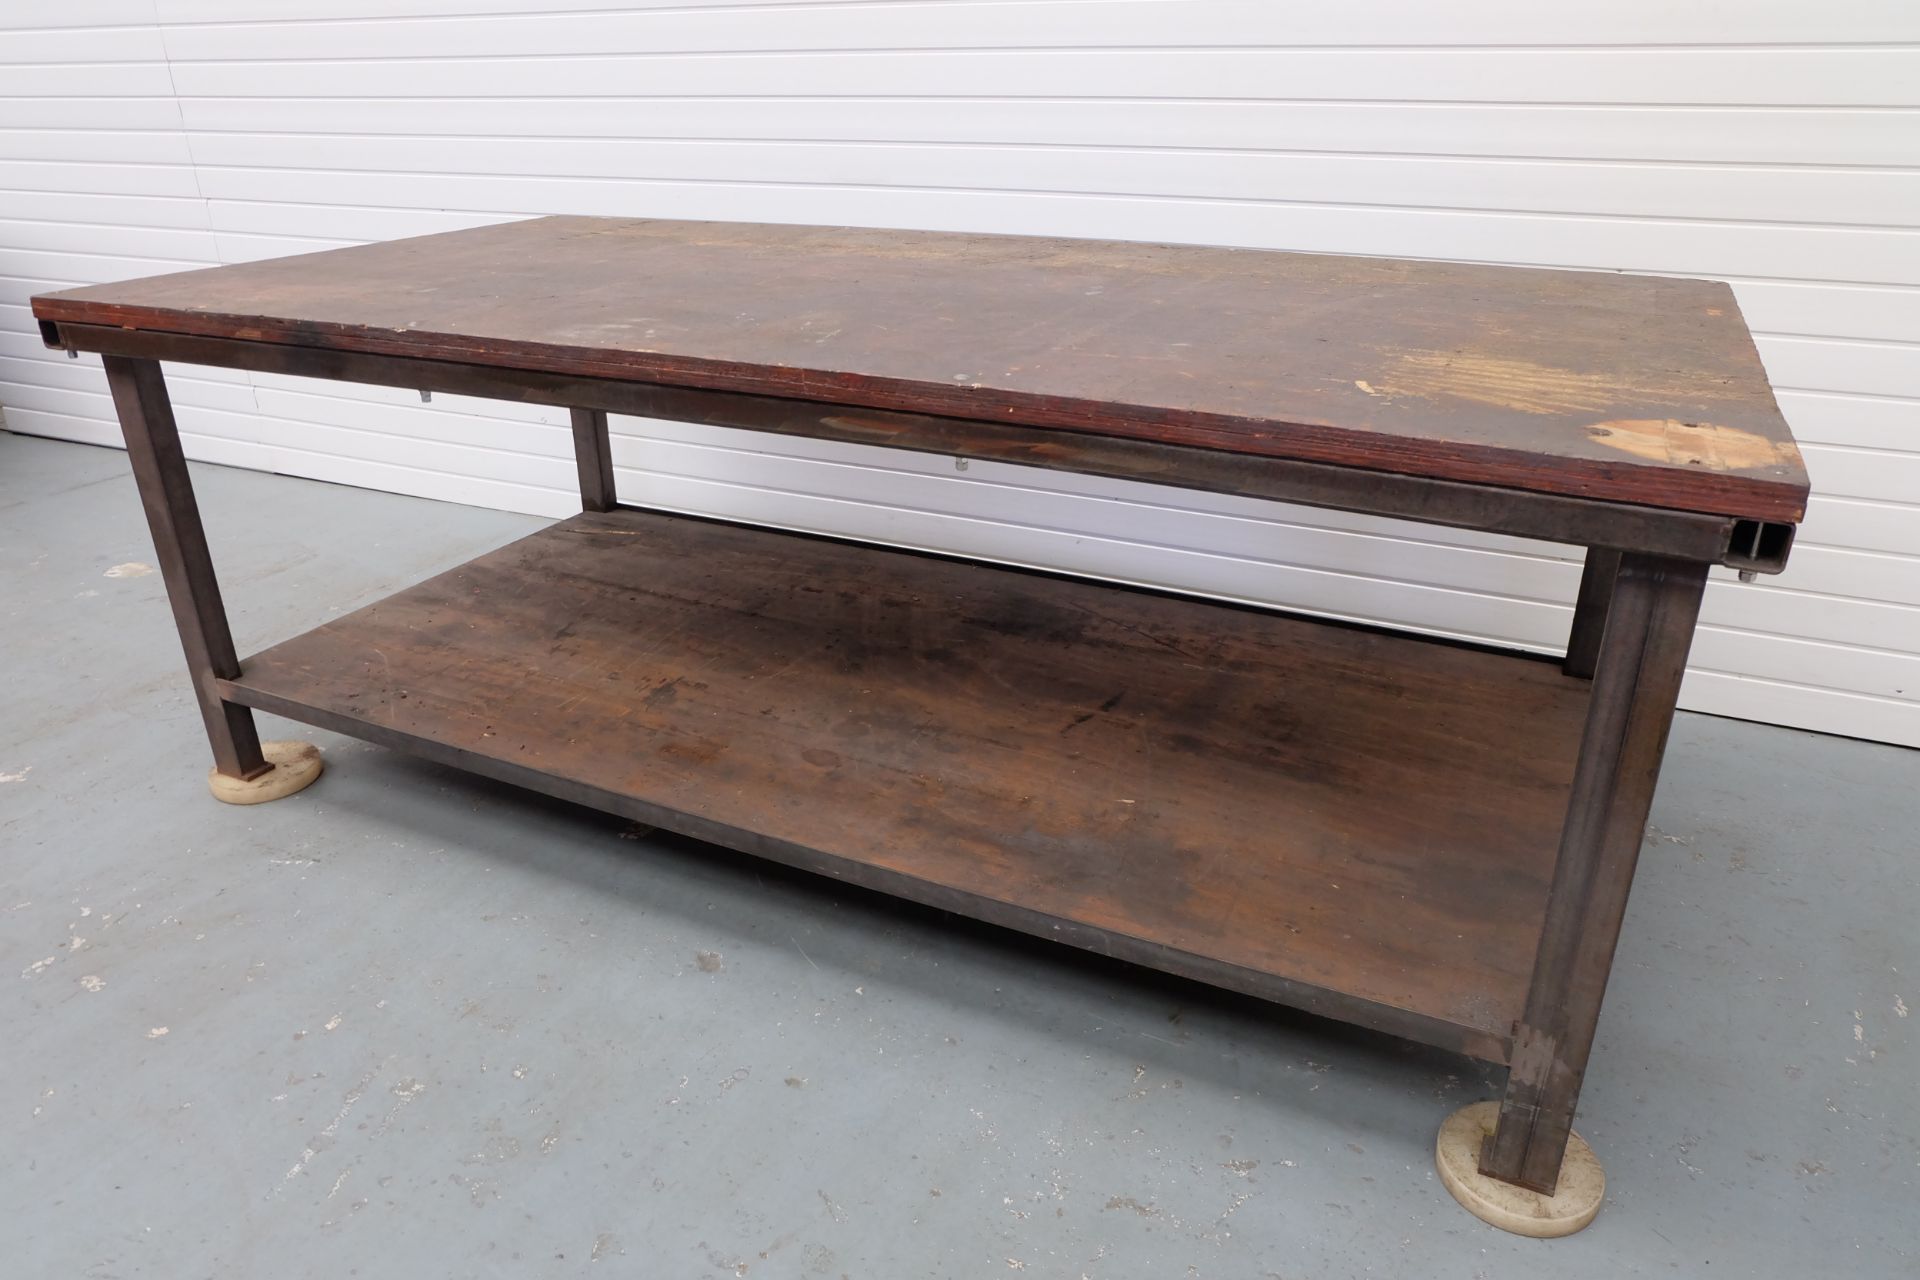 Heavy Duty Work Bench. Steel Frame With 1 1/2" Wooden Top. Size 8' x 4'. Height 35". - Image 5 of 6